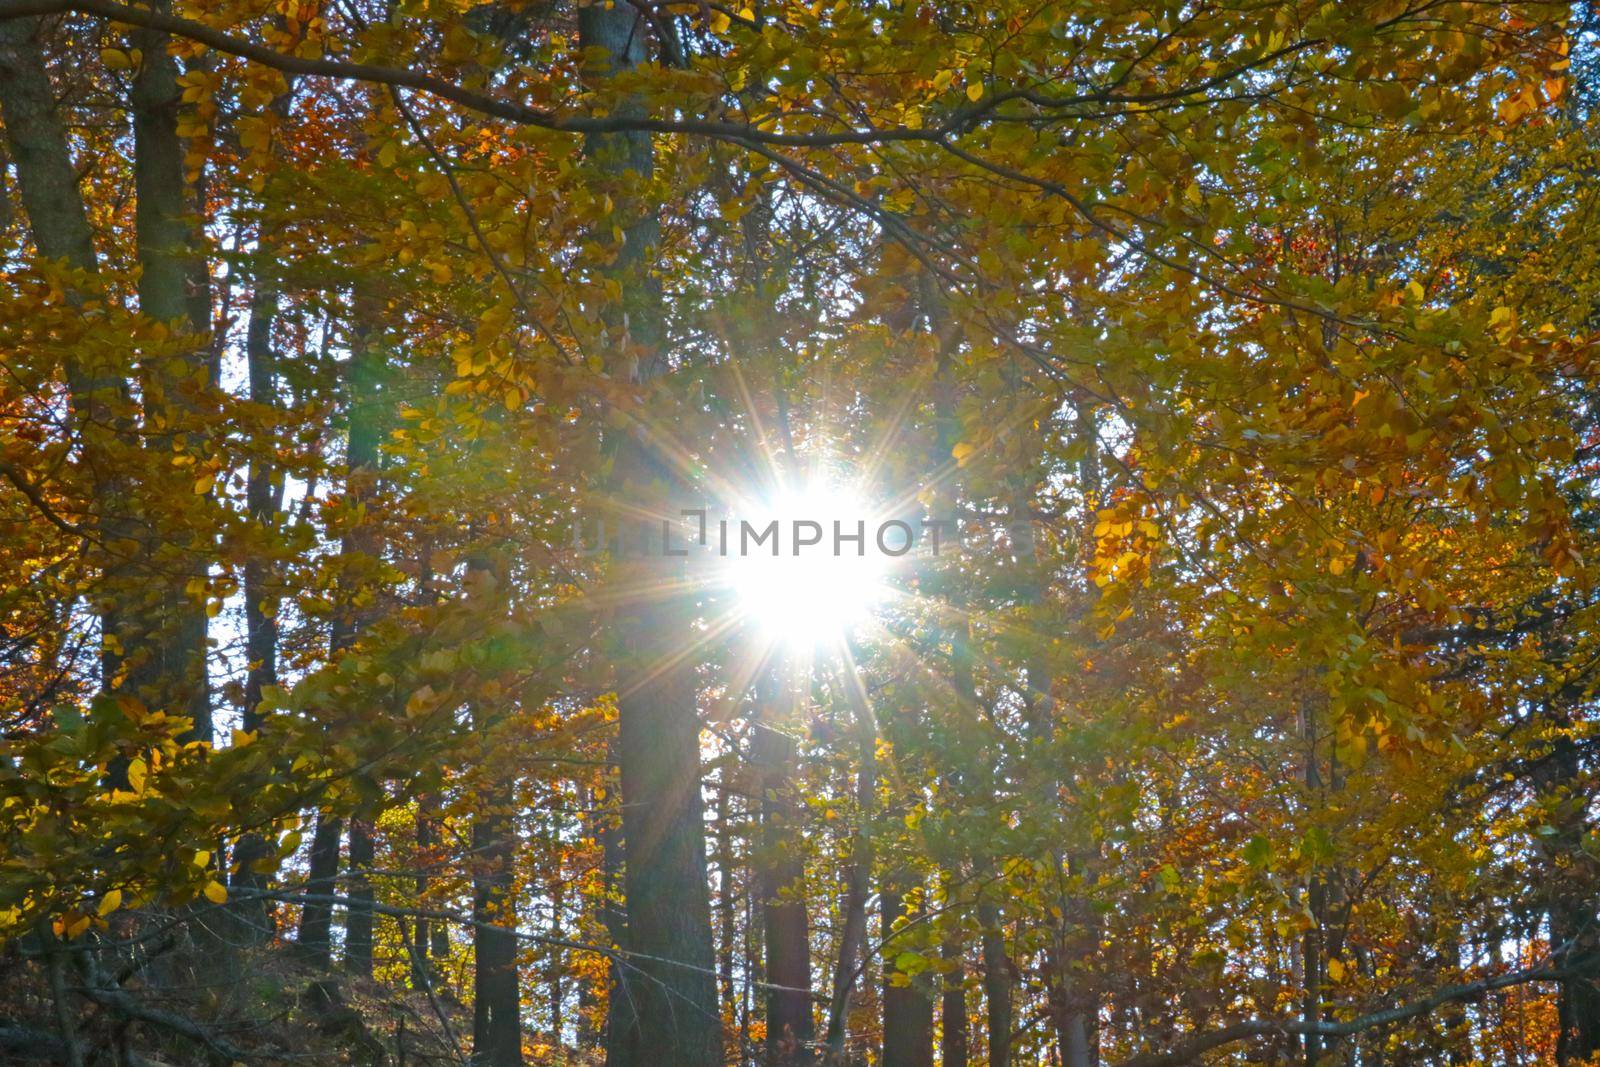 The bright sun shines through the branches of trees in the autumn forest